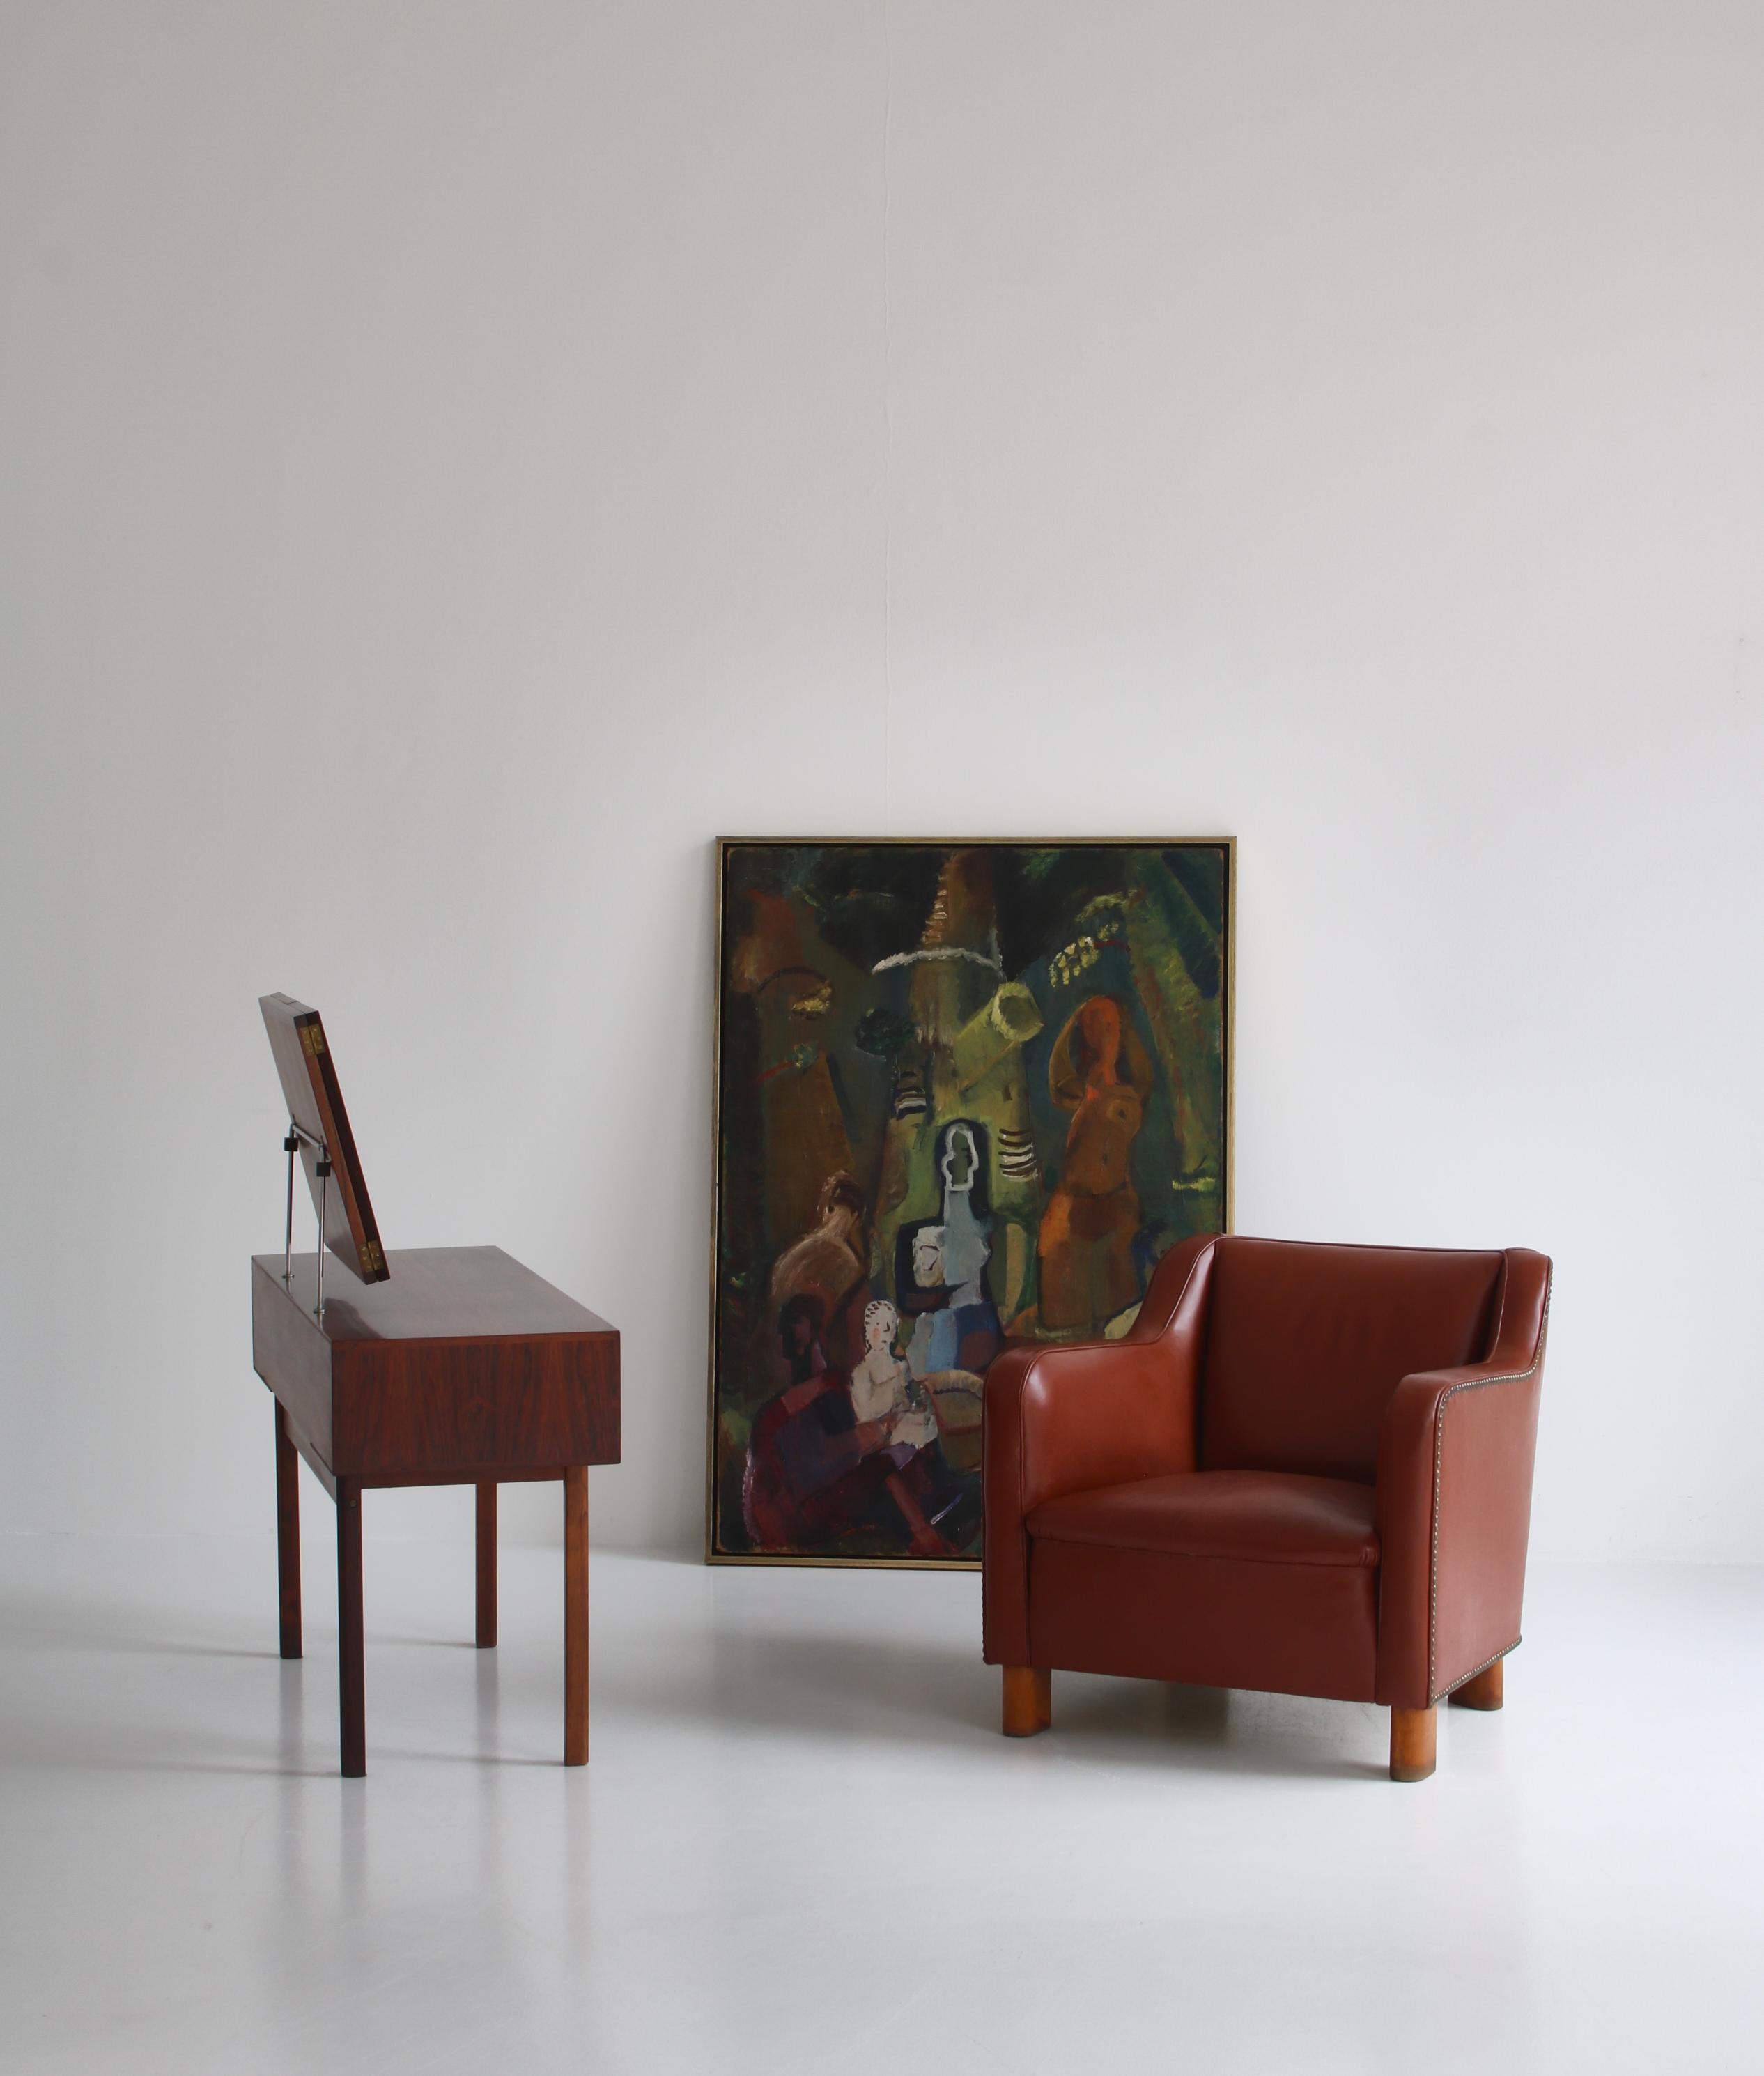 Beautiful authentic Danish Modern easy chair made and designed in the 1940s at Fritz Hansen & Co., Copenhagen. The chair is upholstered in the original natural leather with brass nails and the legs are made from stained beech. The style combines Art